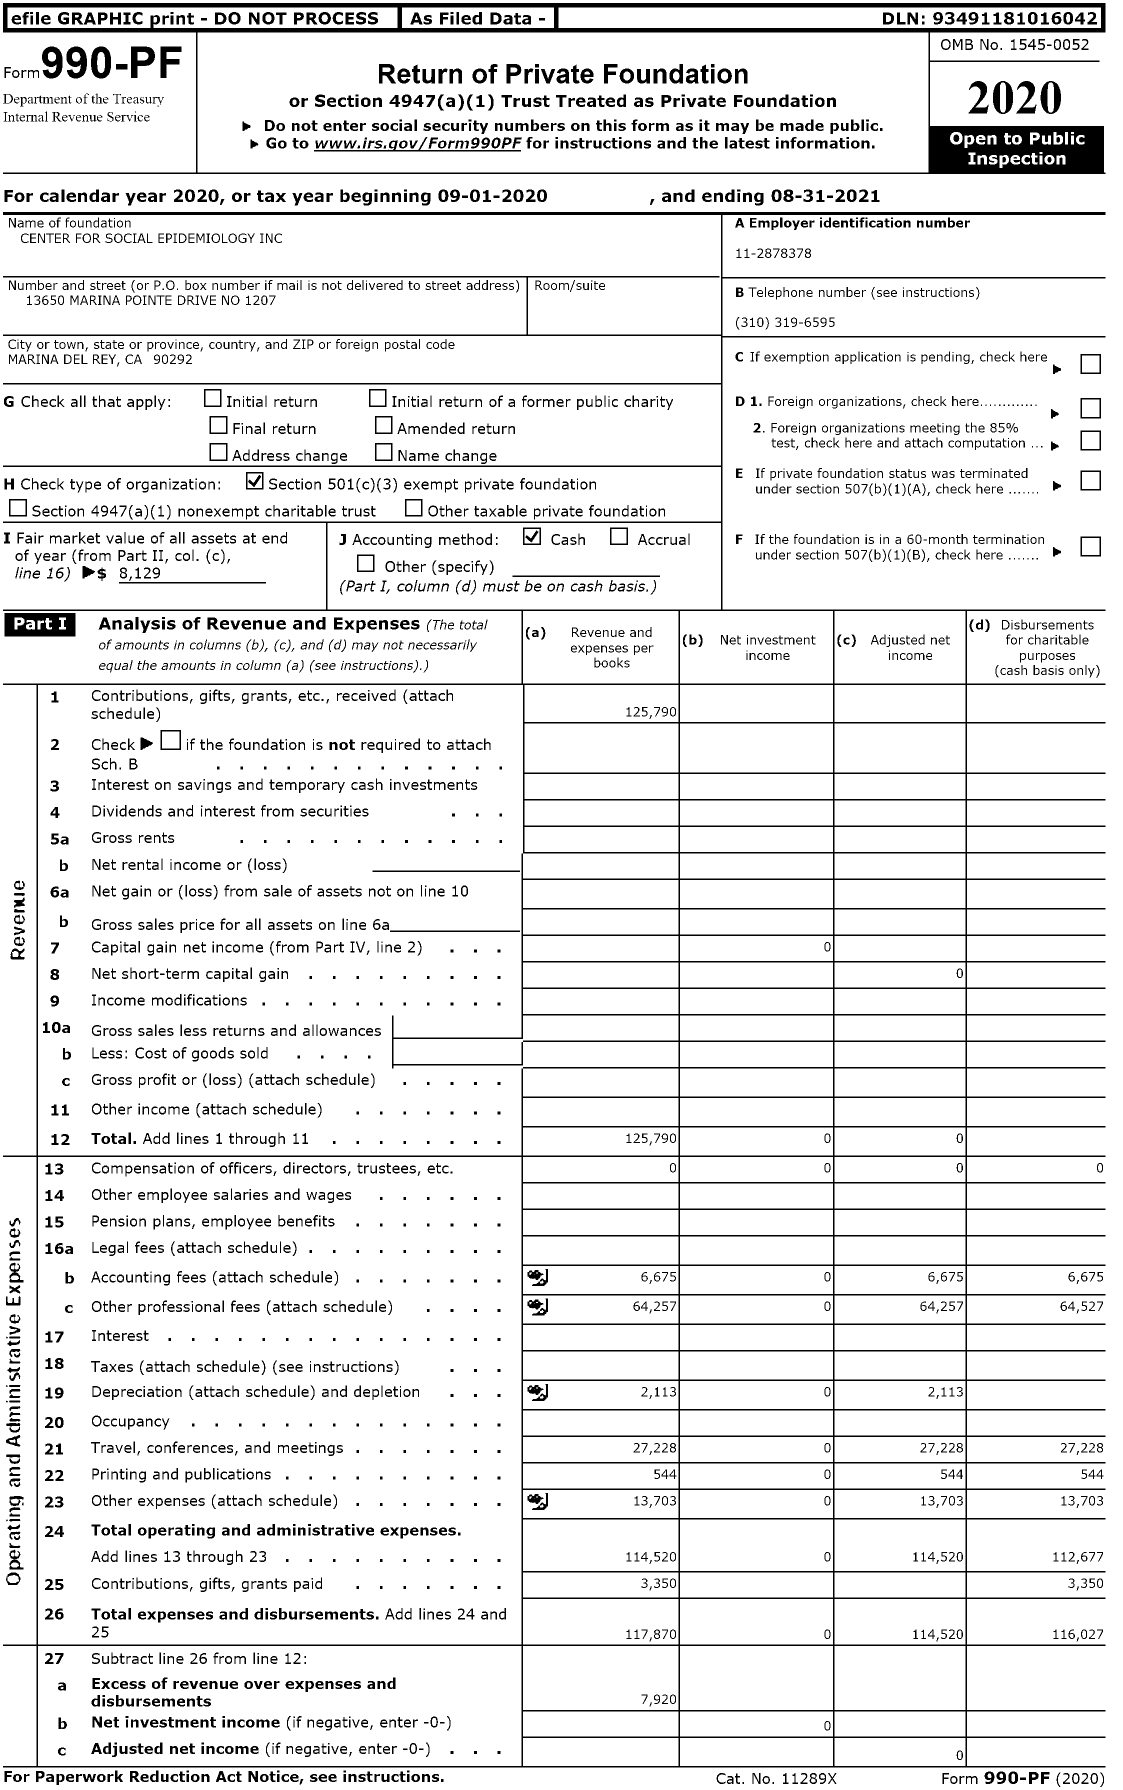 Image of first page of 2020 Form 990PF for Center for Social Epidemiology